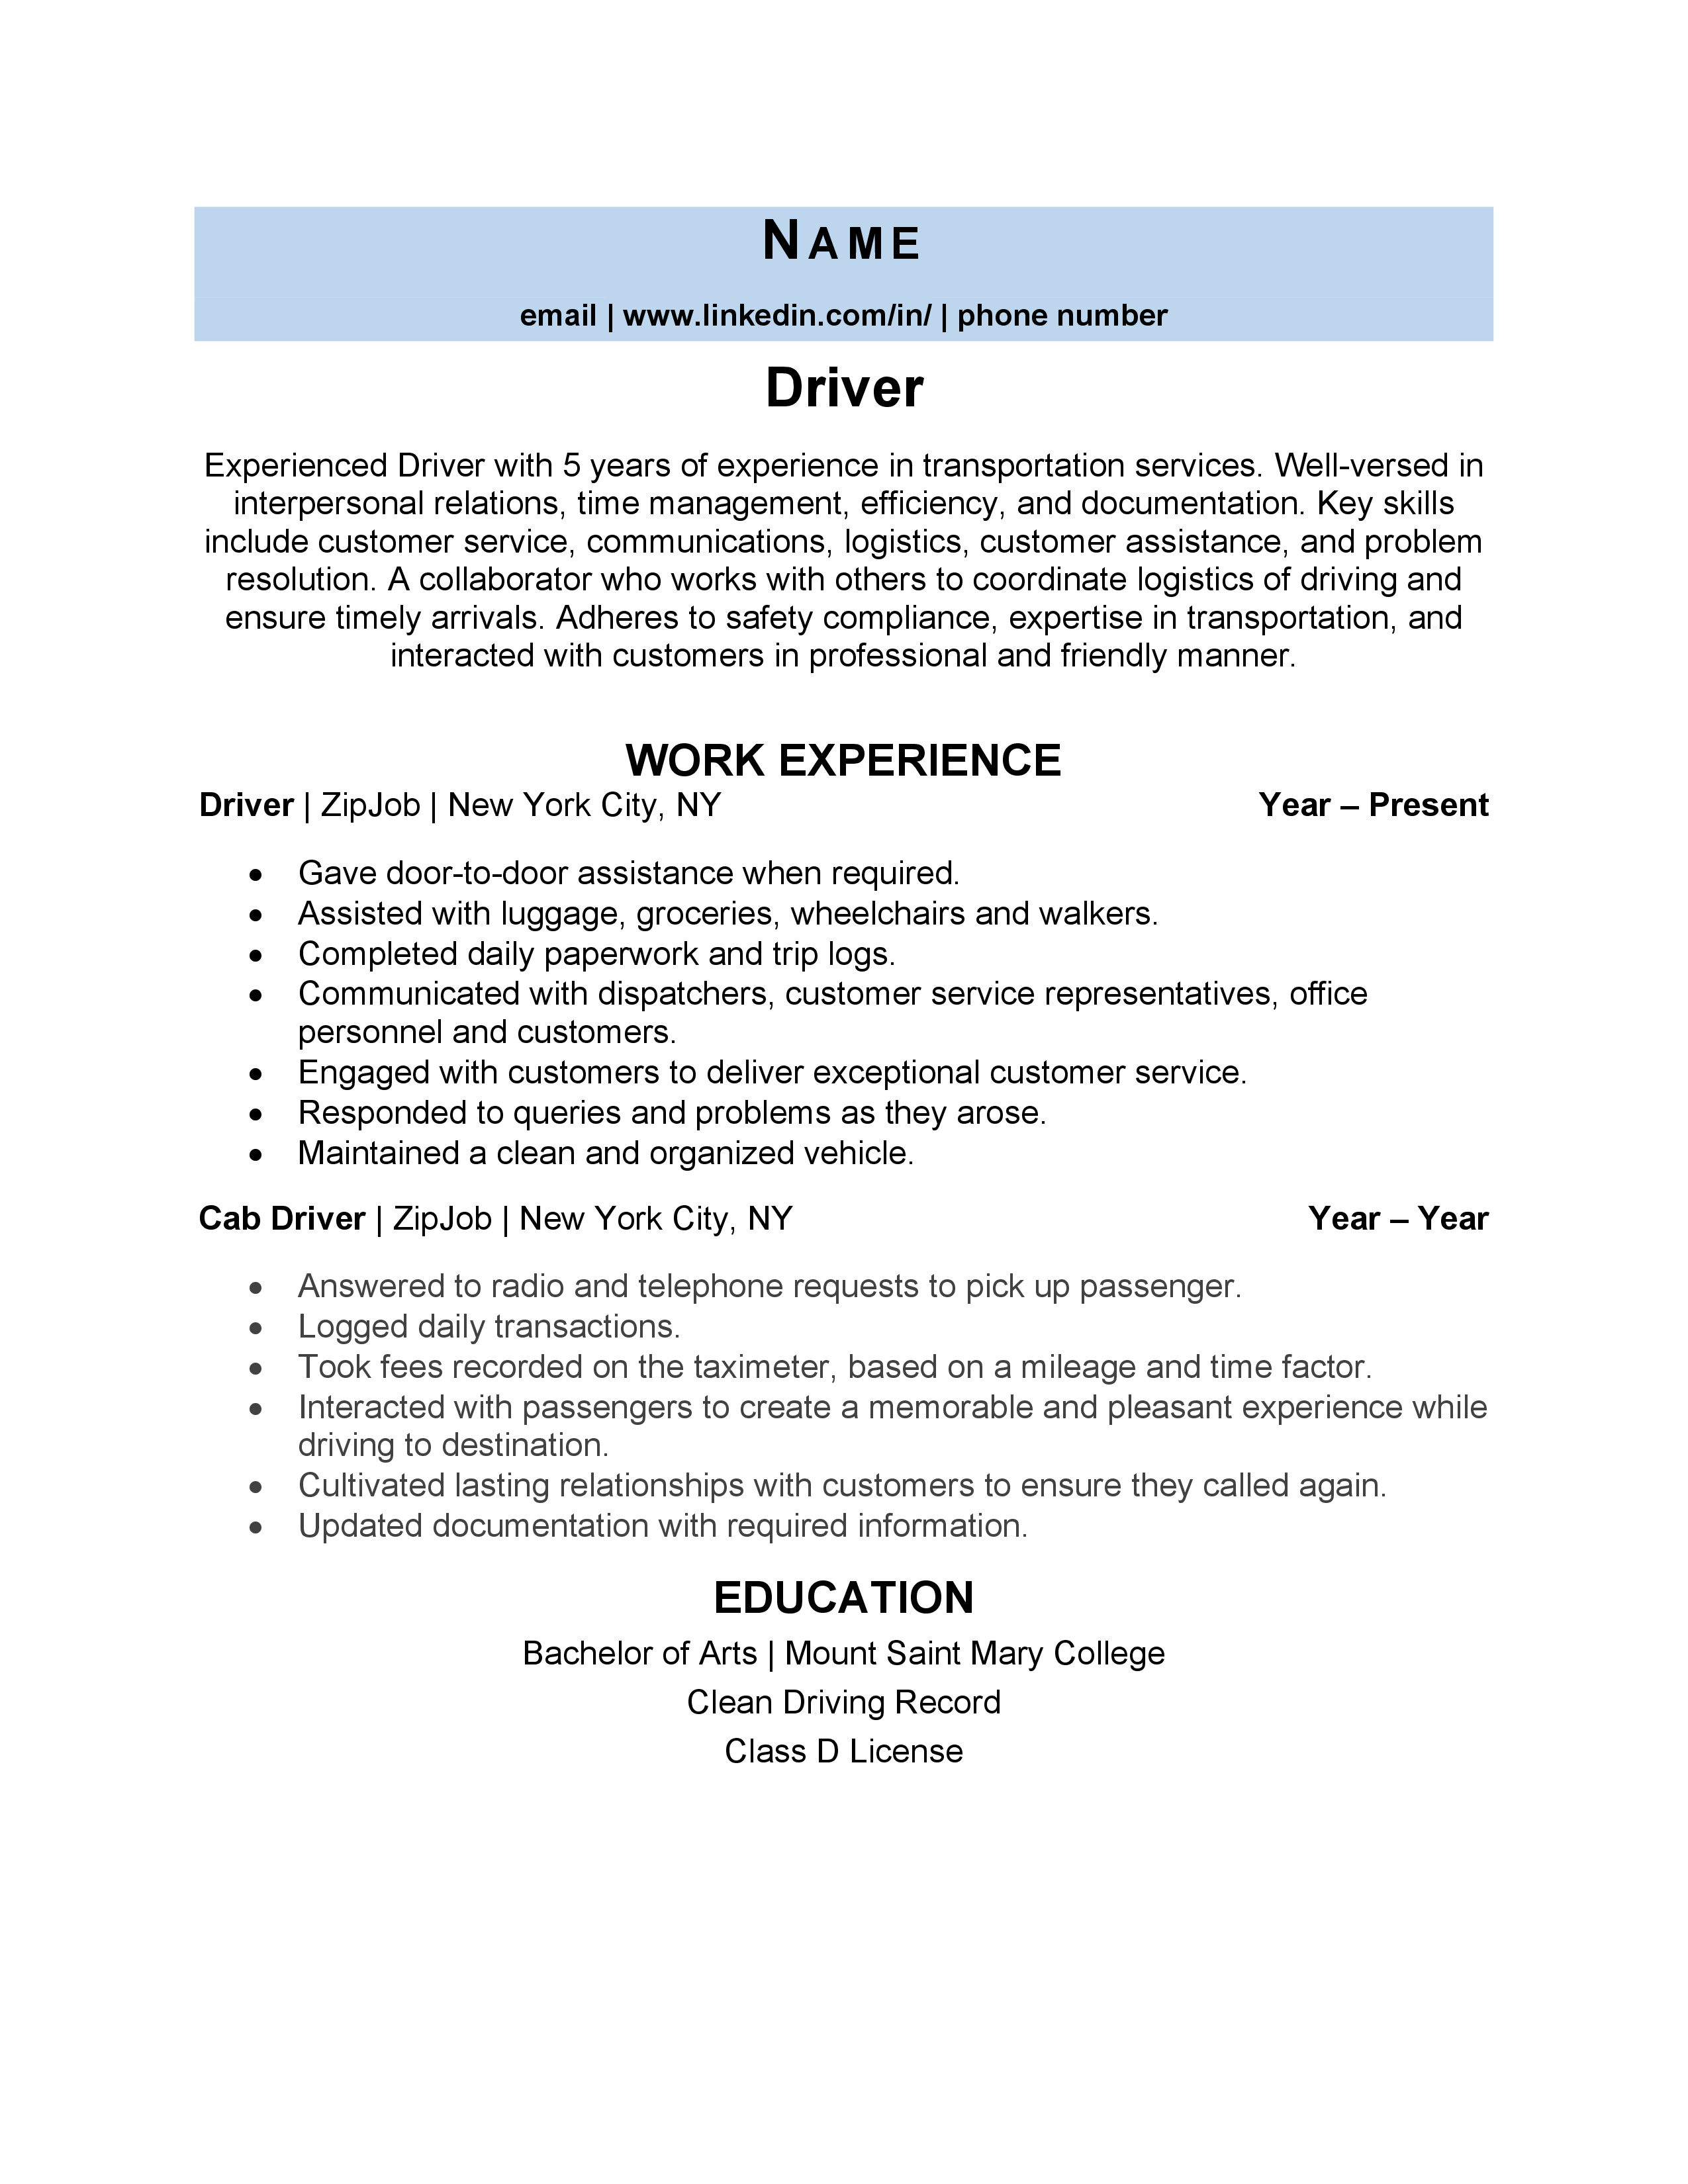 sample resume for class 1 driver